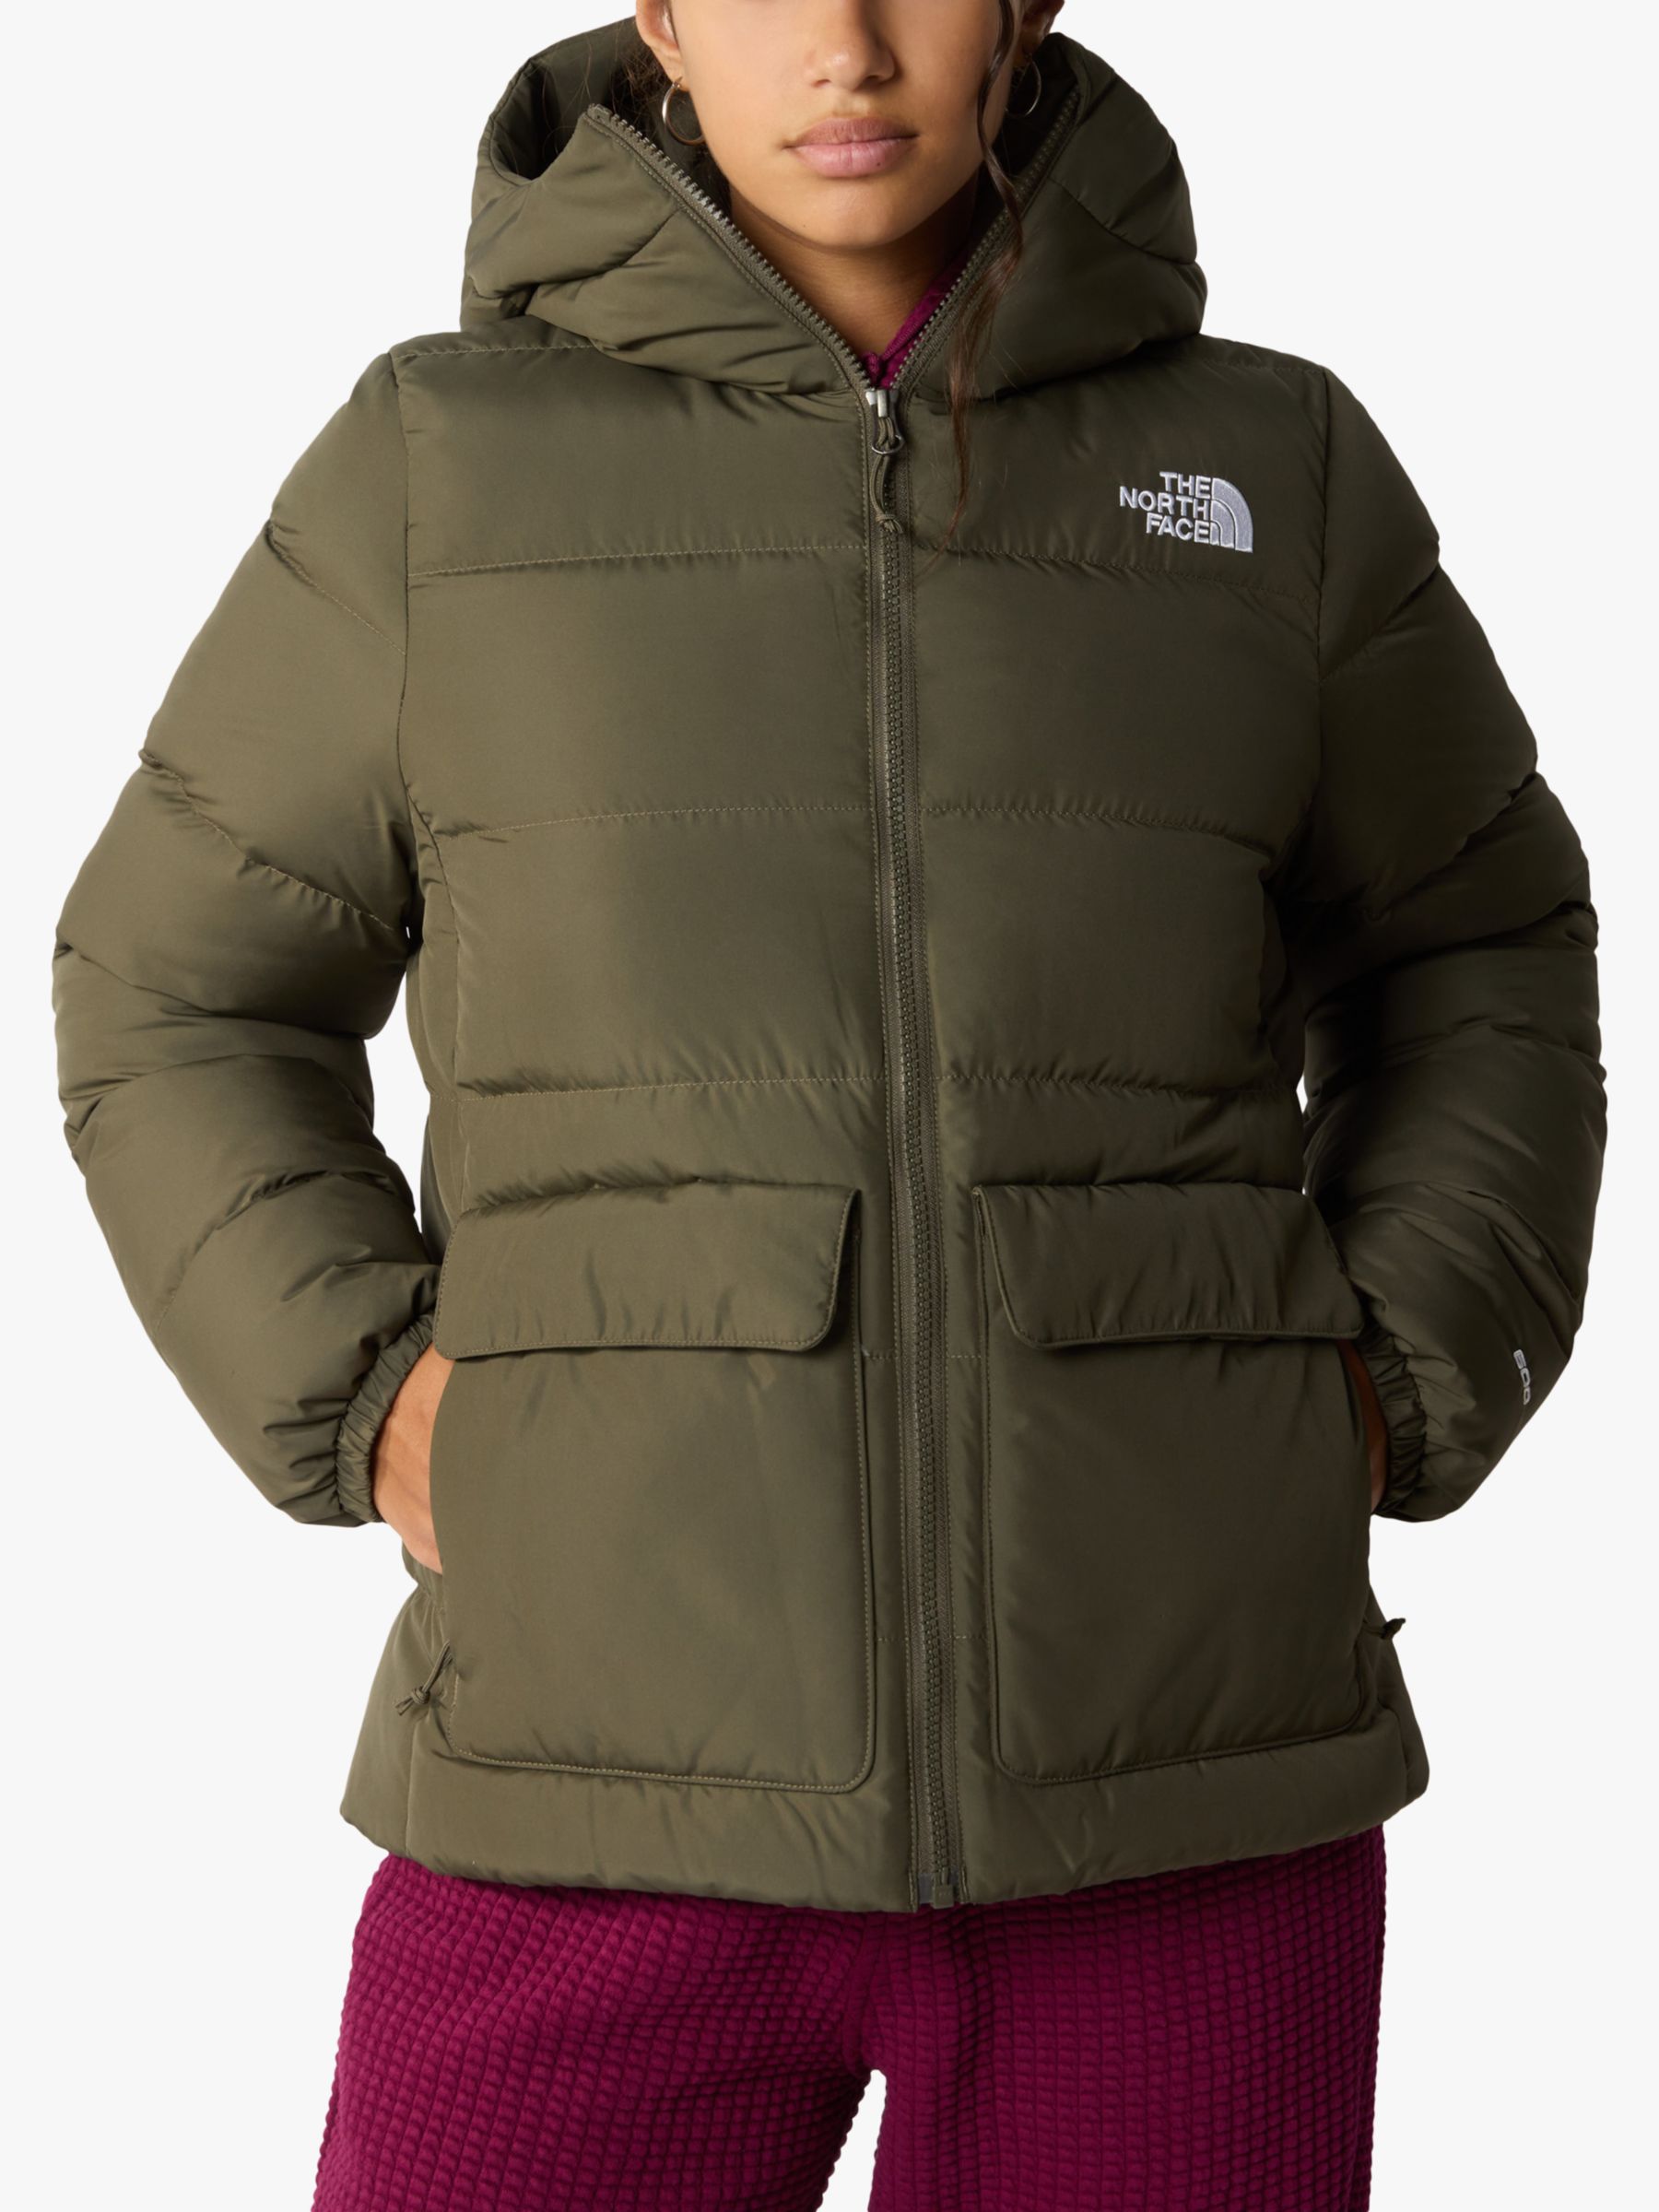 The North Face Women's Gotham Jacket, Green at John Lewis & Partners